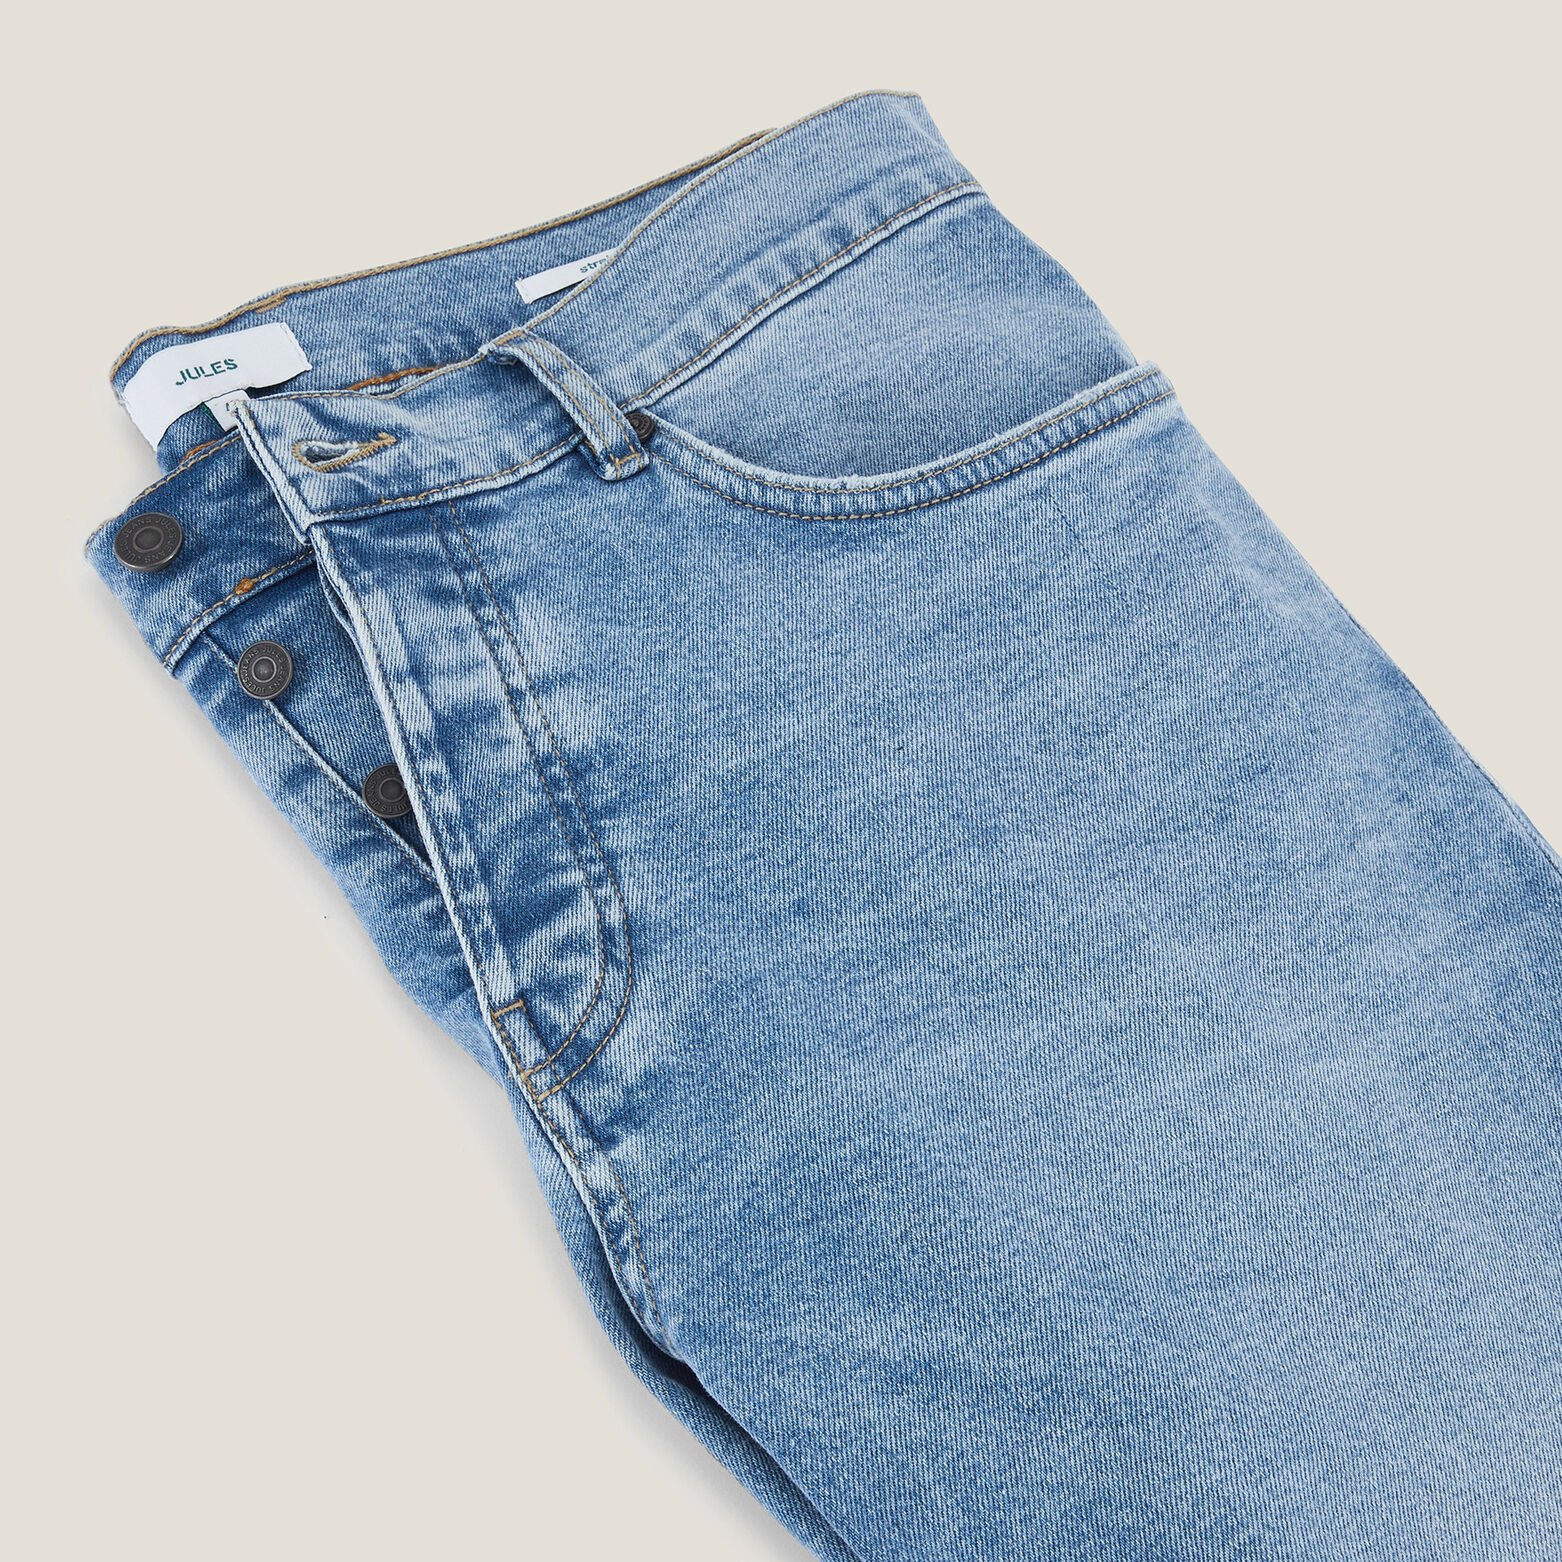 Straight circulaire jeans by JULES